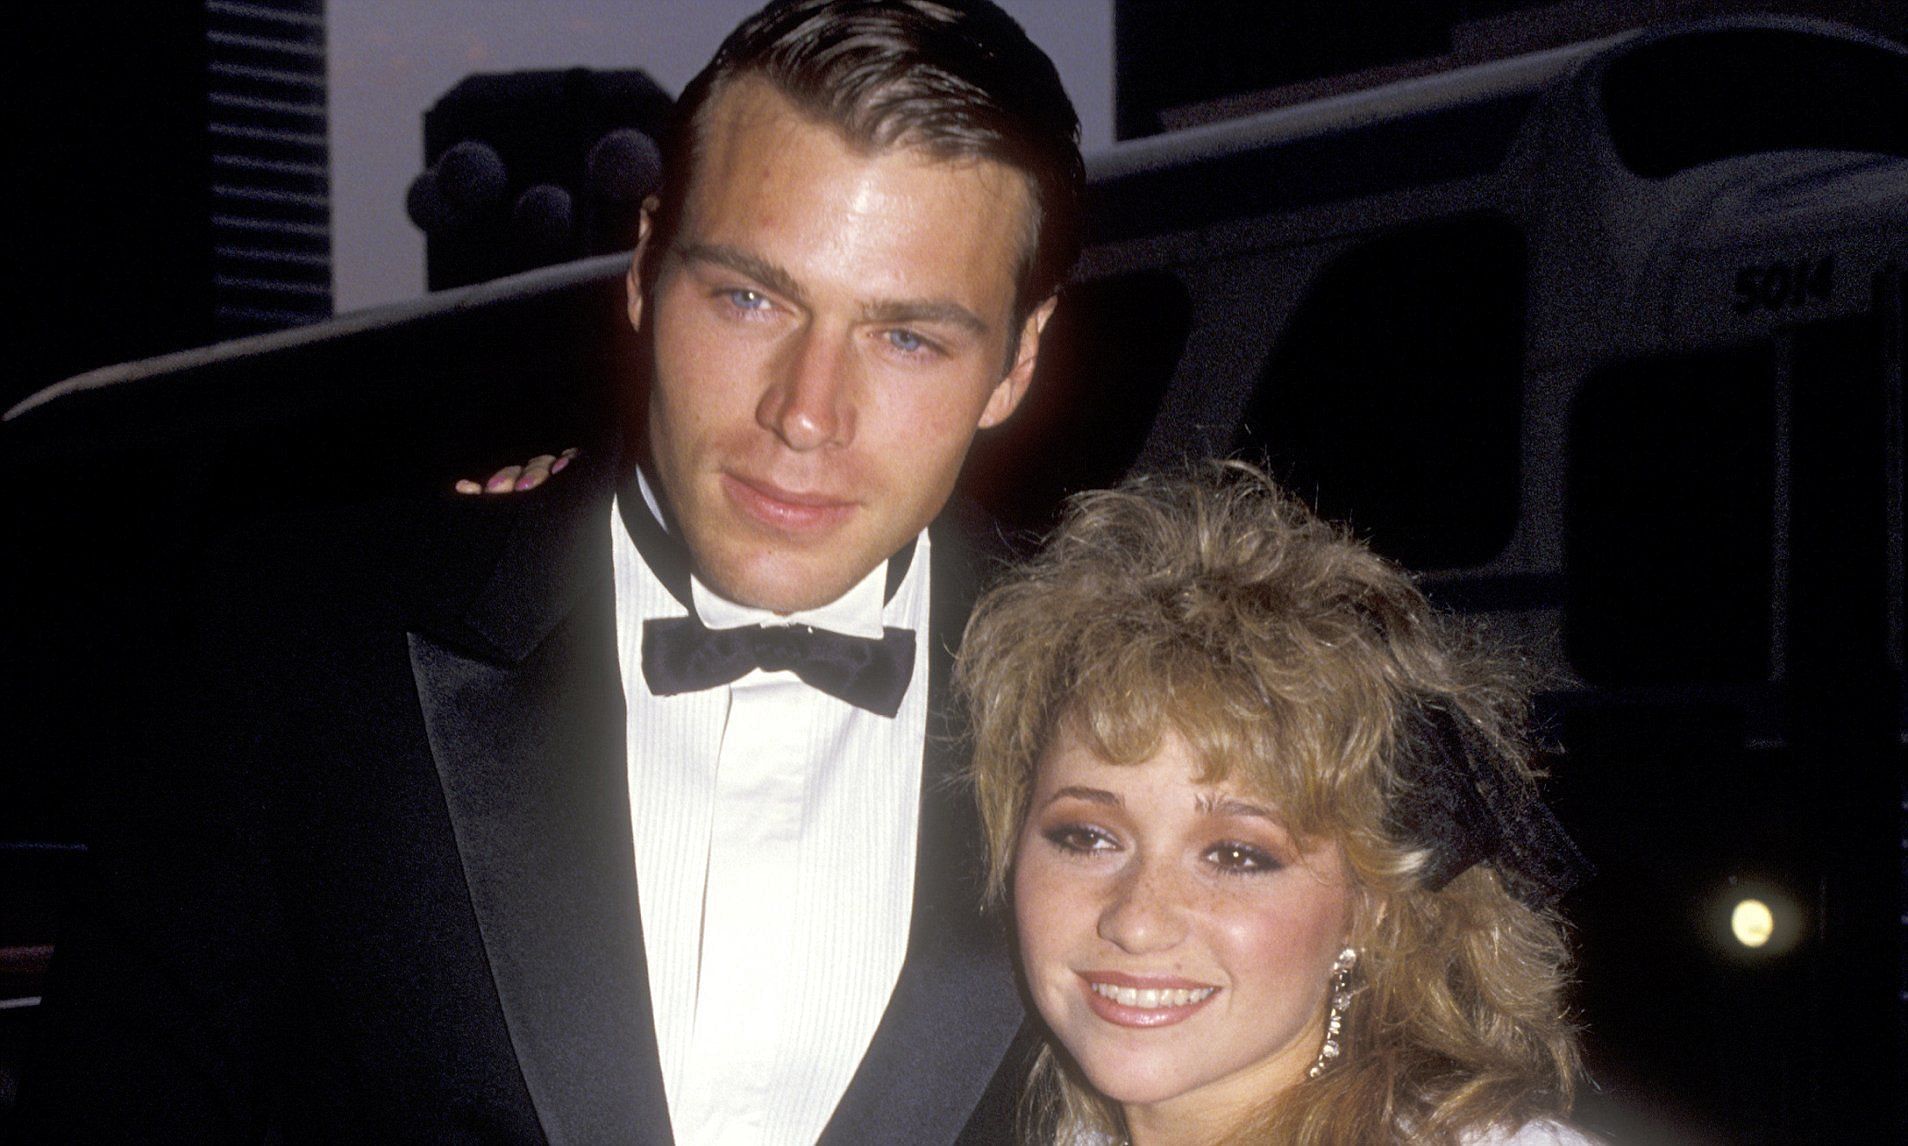 Jon-Erik Hexum accidentally shot himself with a prop gun on the set of &#039;Cover Up&#039; (Image via Getty Images)